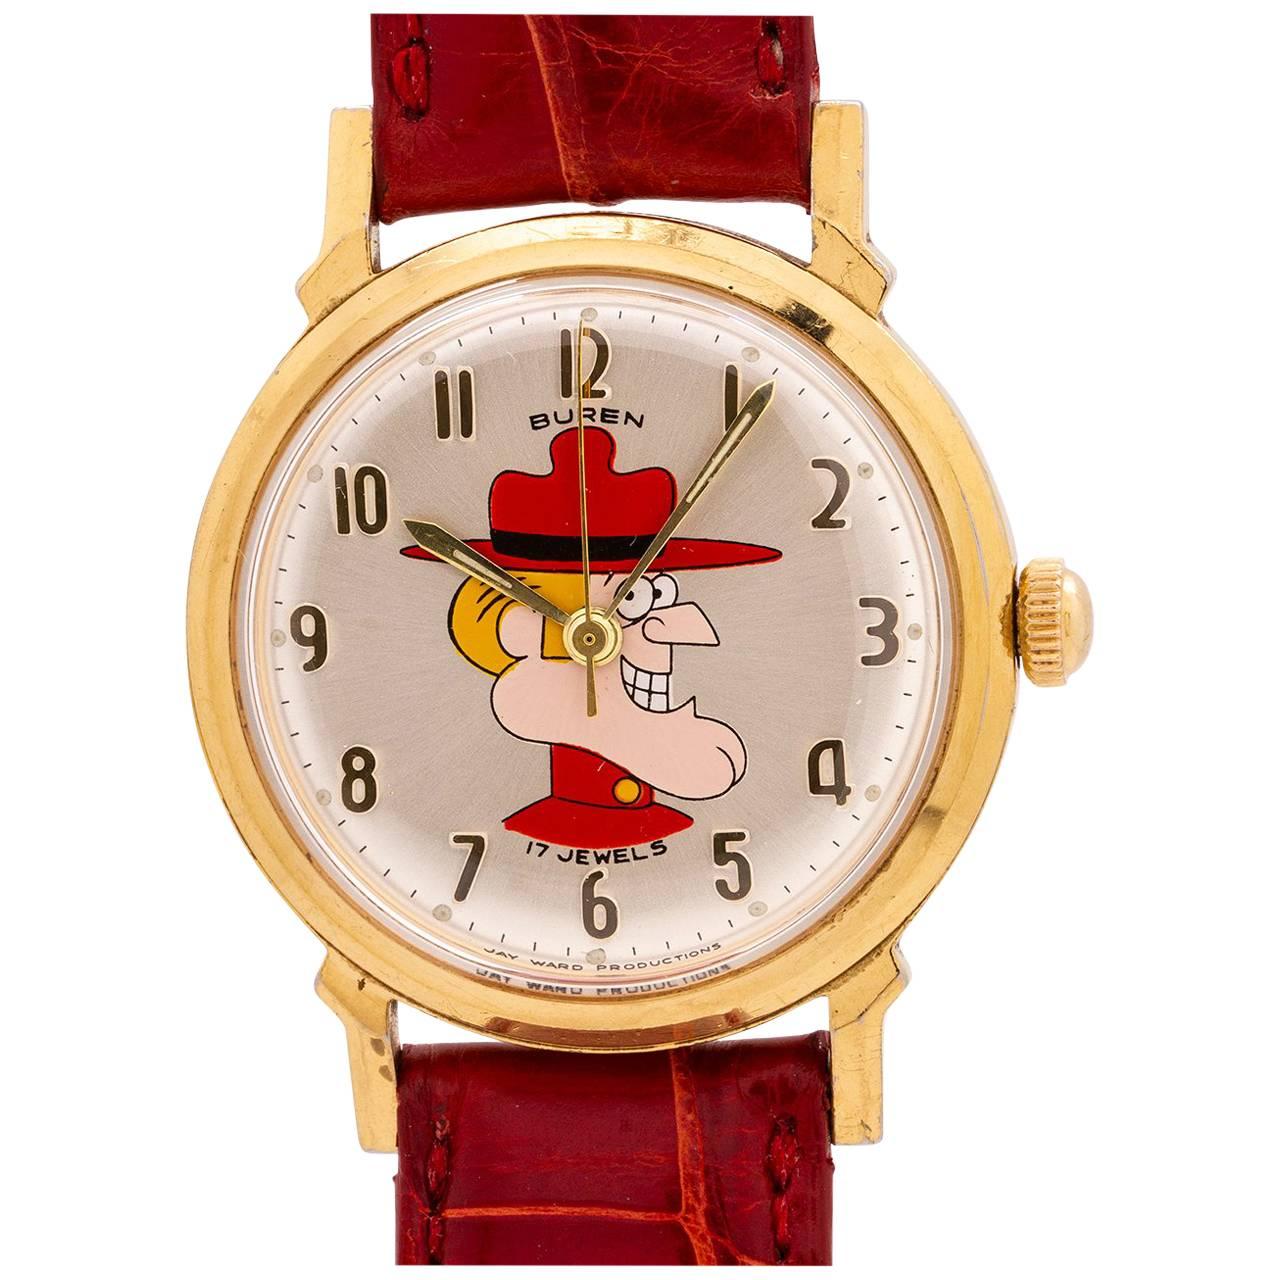 Buren Dudley Do-Right from Rocky and Bullwinkle manual Wristwatch, circa 1960s